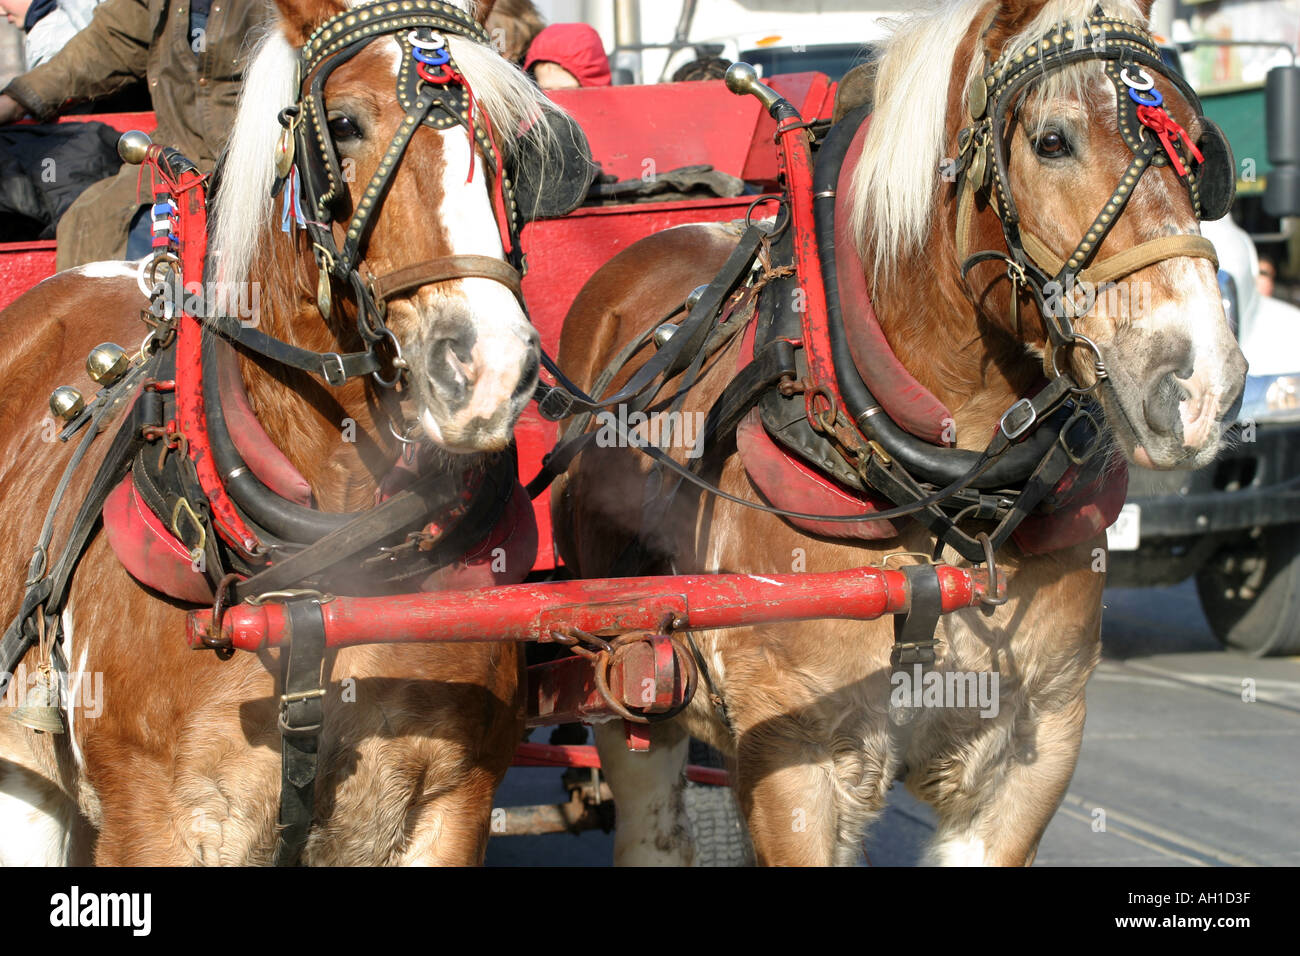 work horses harnessed and ready to pull cart Stock Photo